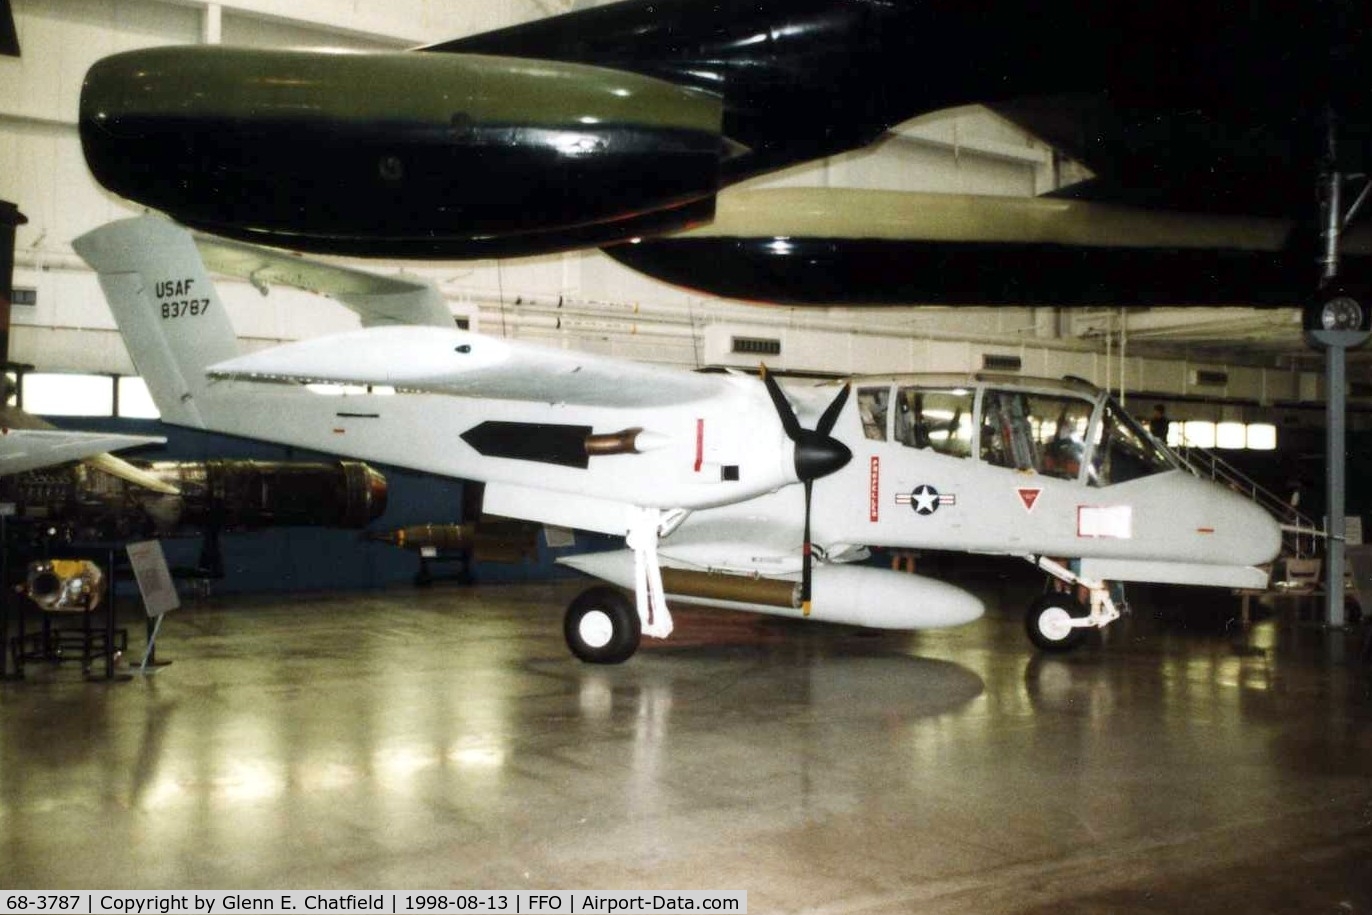 68-3787, 1968 North American Rockwell OV-10A Bronco C/N 321-113, OV-10A At the National Museum of the U.S. Air Force